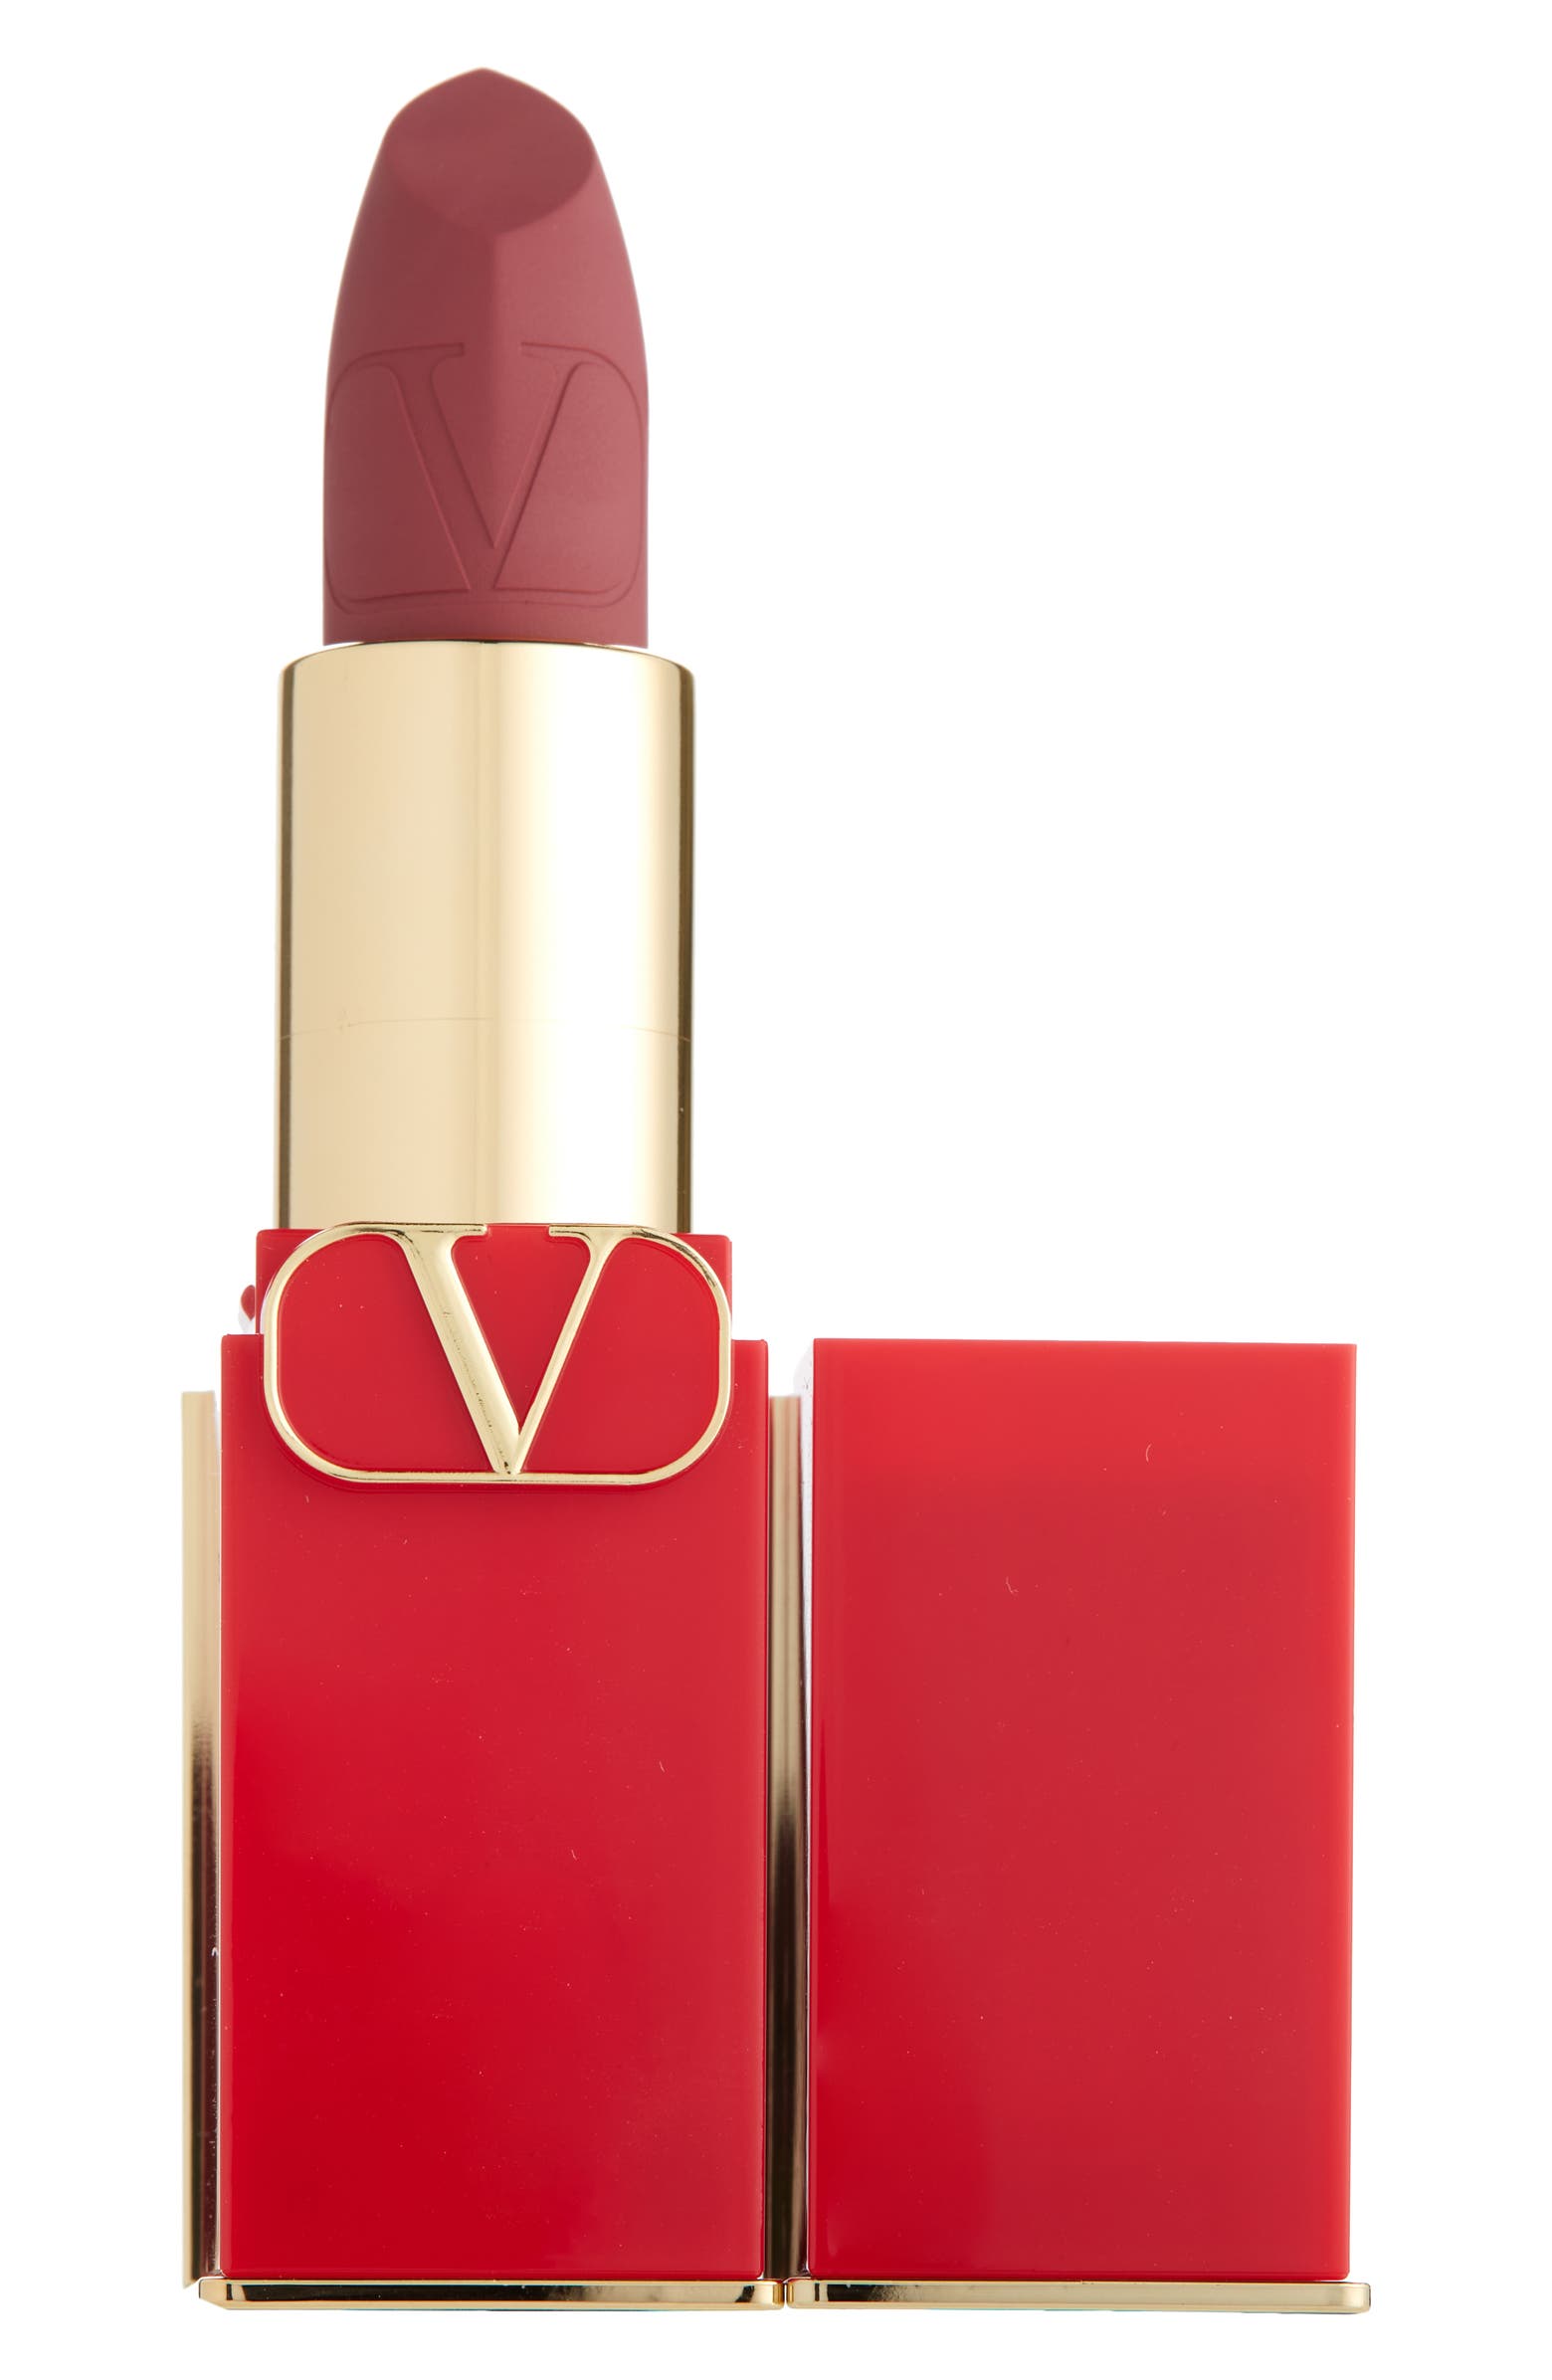 The Most Expensive Makeup Brands: Red lipstick from Valentino